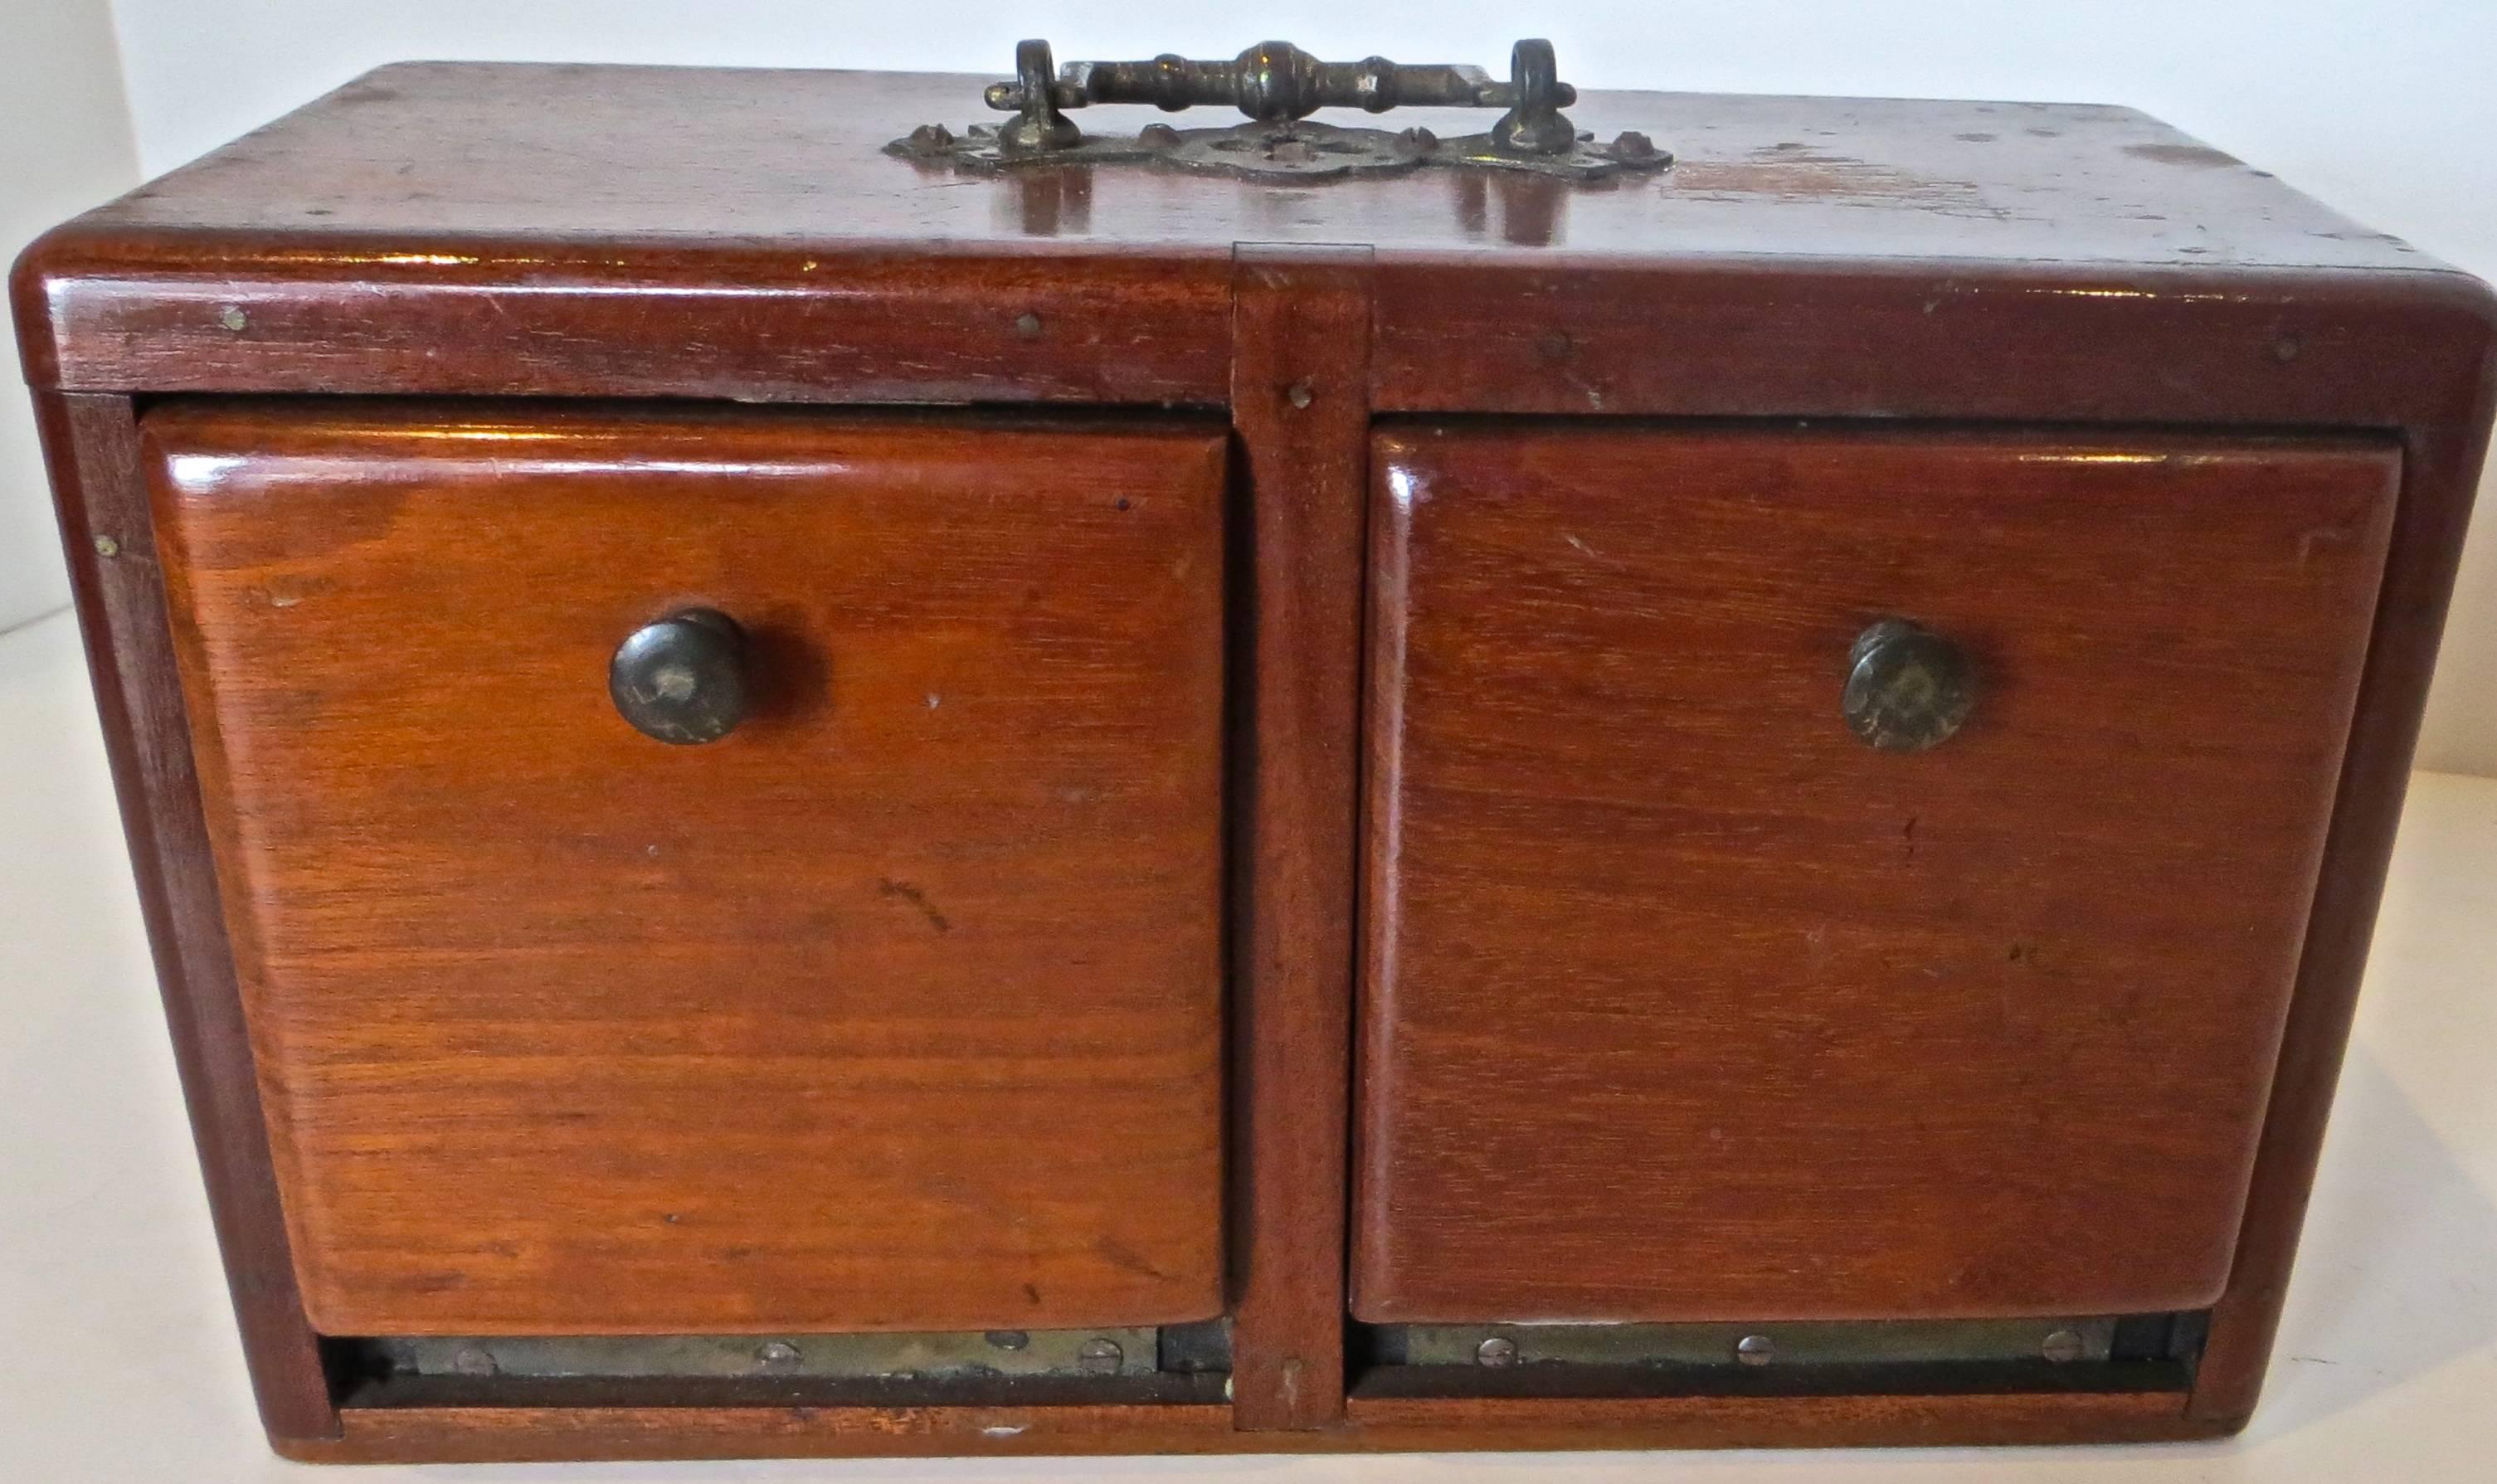 19th Century Two-Sided Four-Door Box with Pair of Dice, Magic Trick, circa 1890